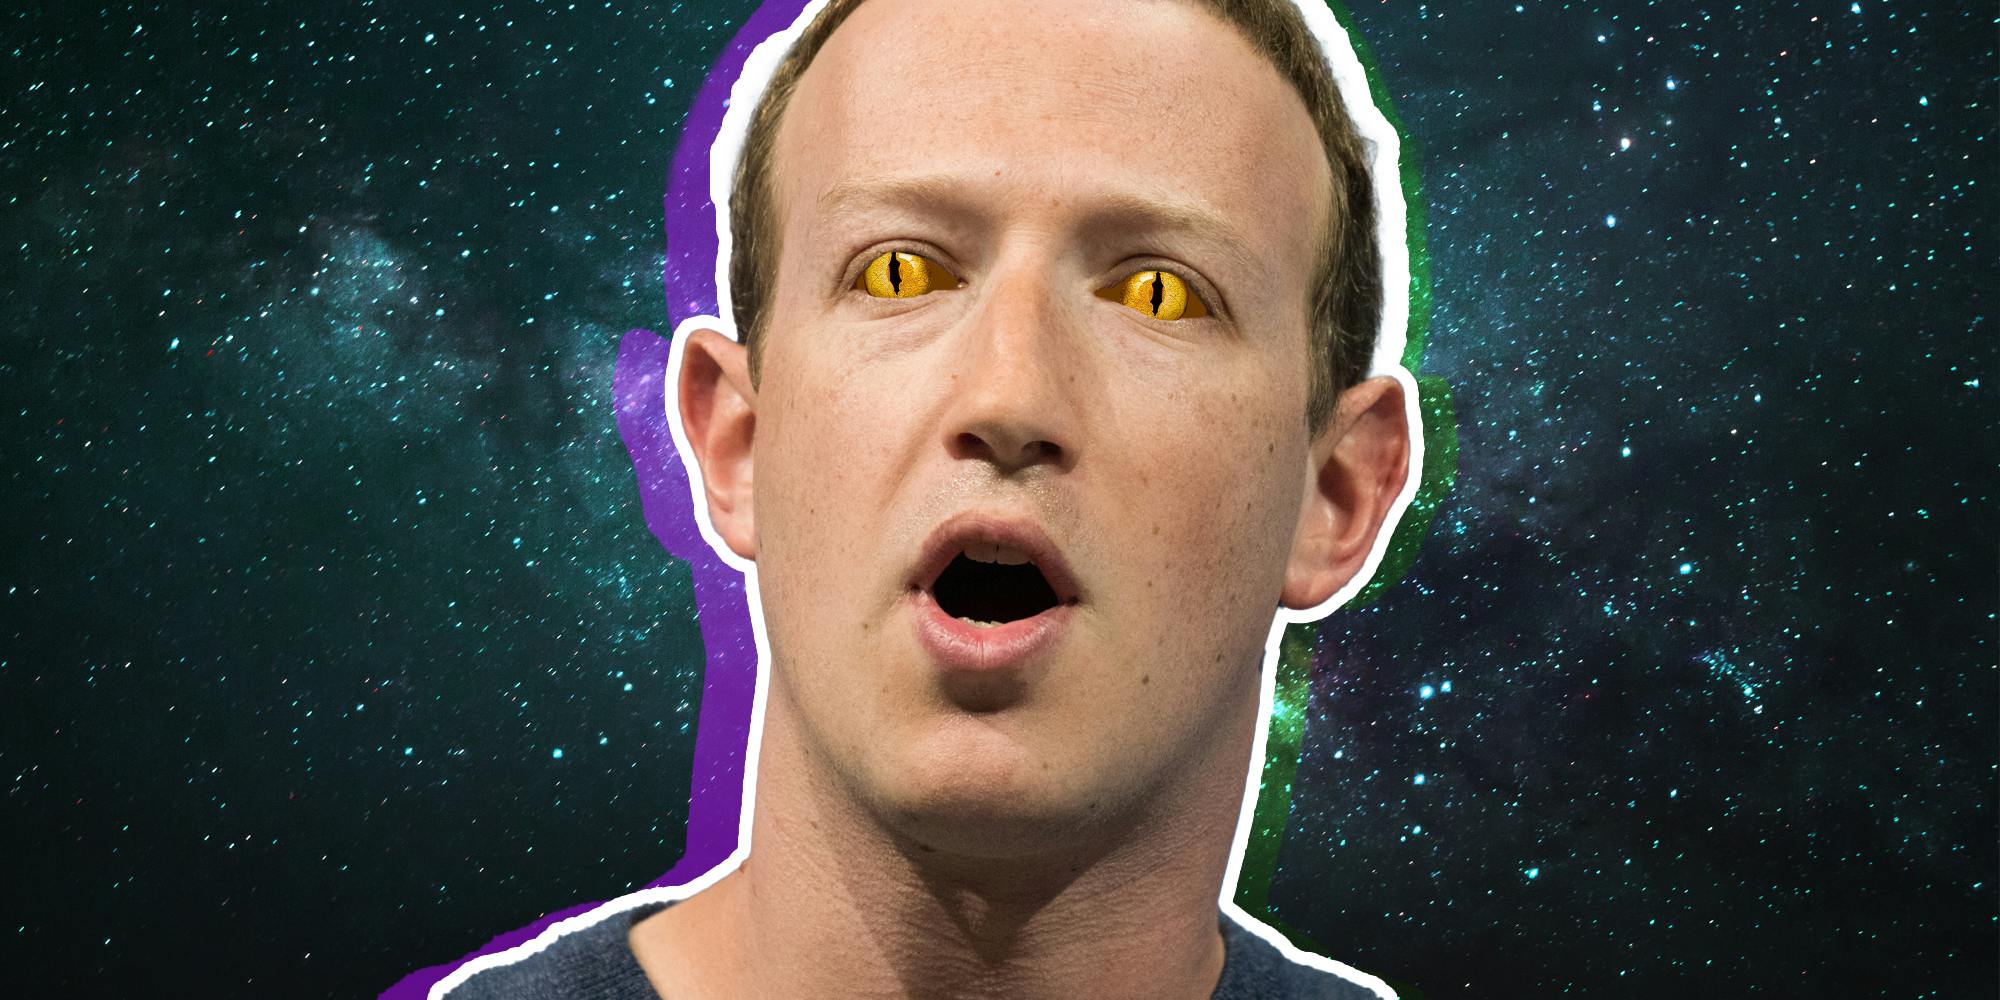 Mark Zuckerberg with lizard eyes in front of space background